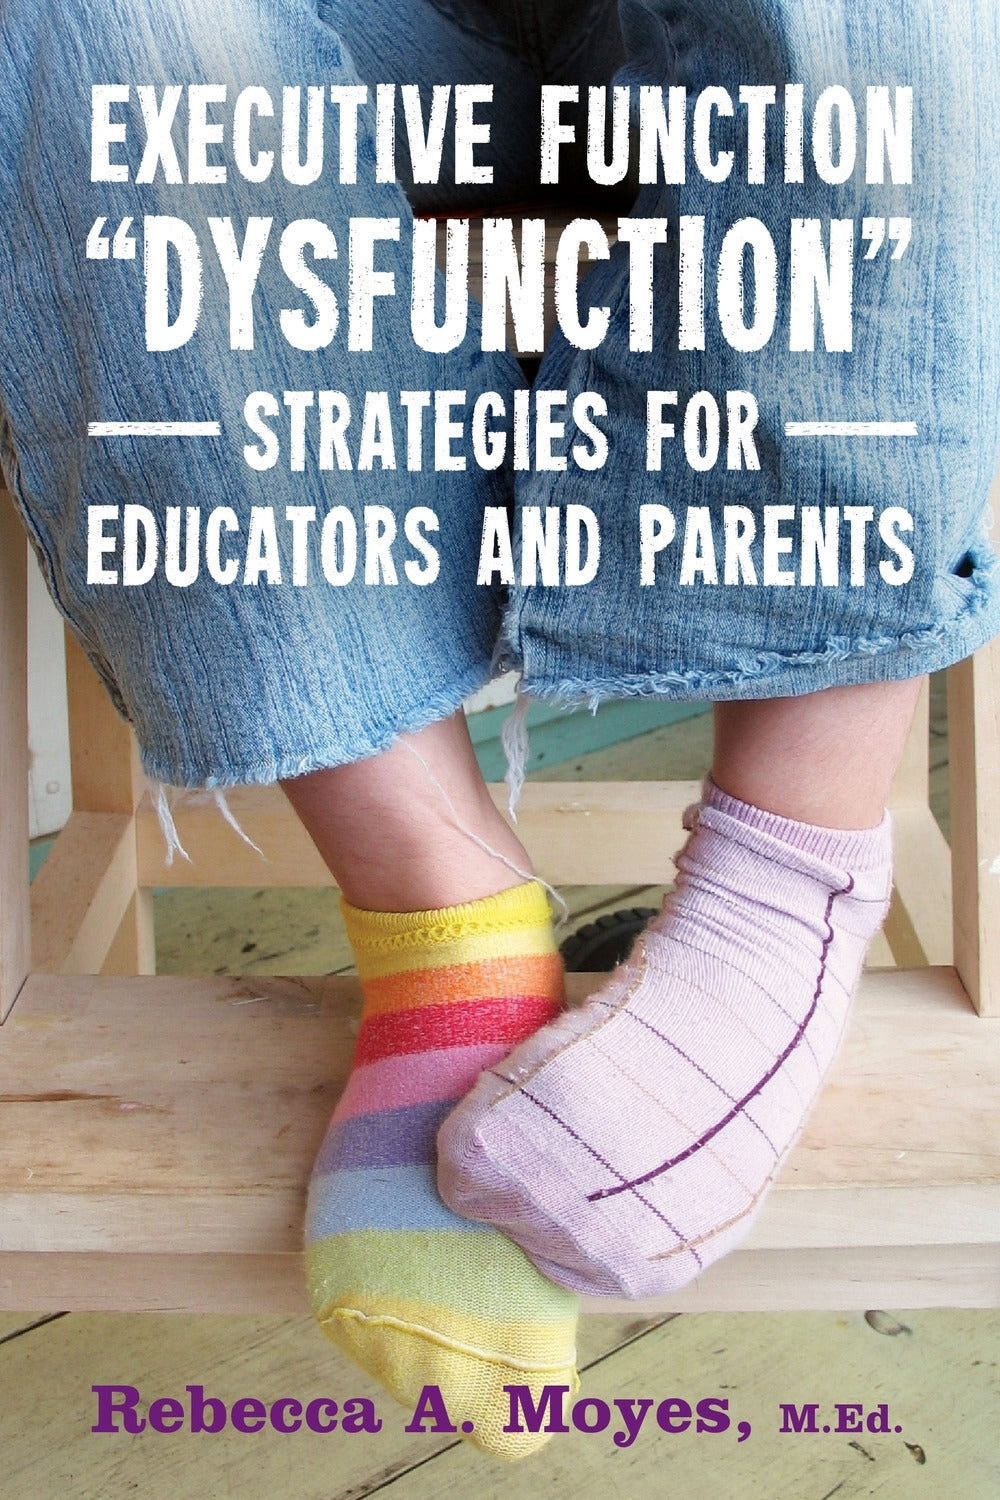 Executive Function Dysfunction - Strategies for Educators and Parents by Rebecca Moyes